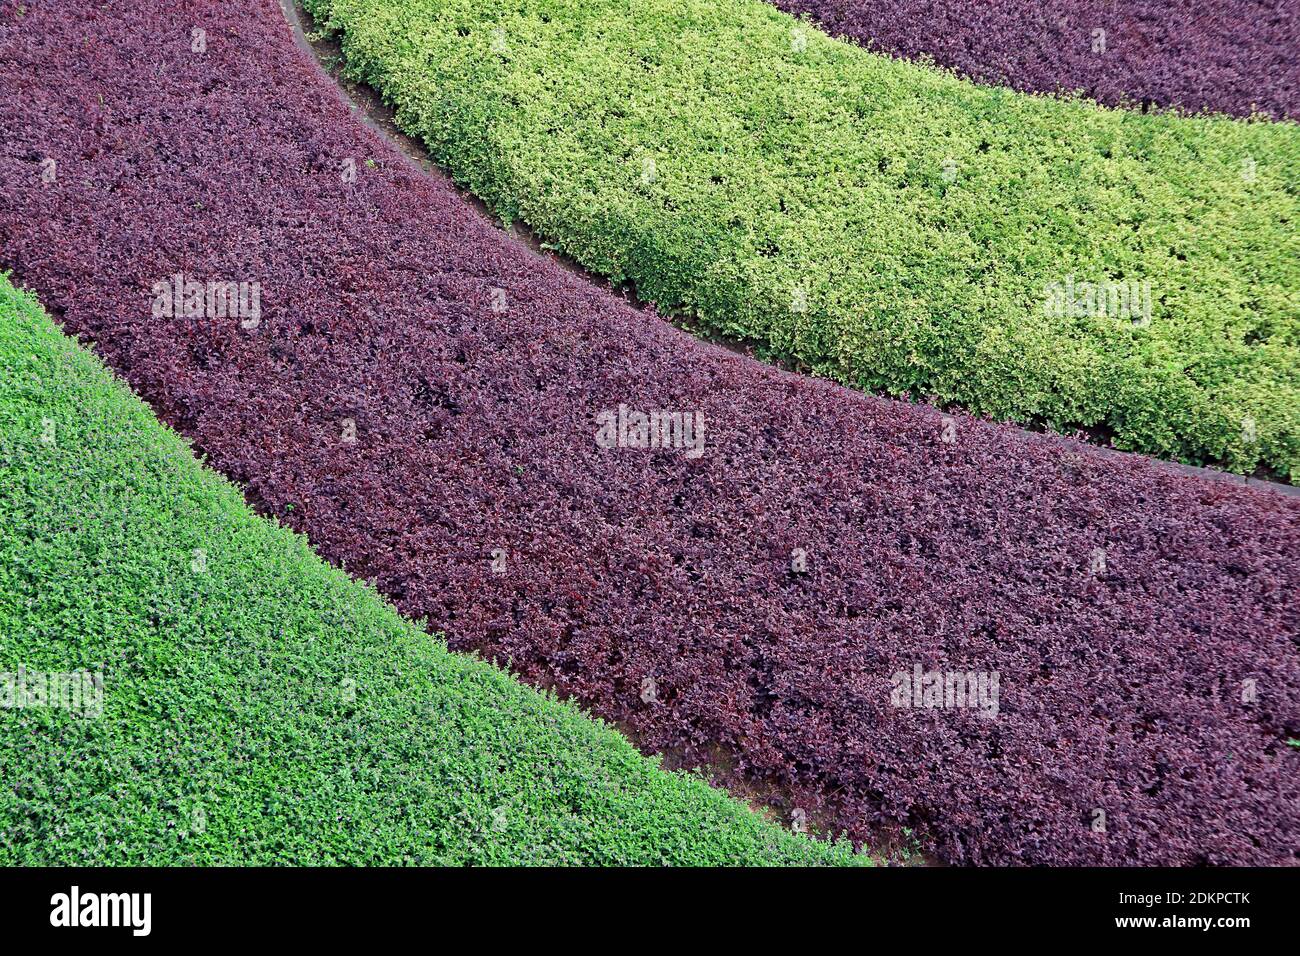 Curve pattern of purple and green ornamental shrubs in the garden for abstract background Stock Photo